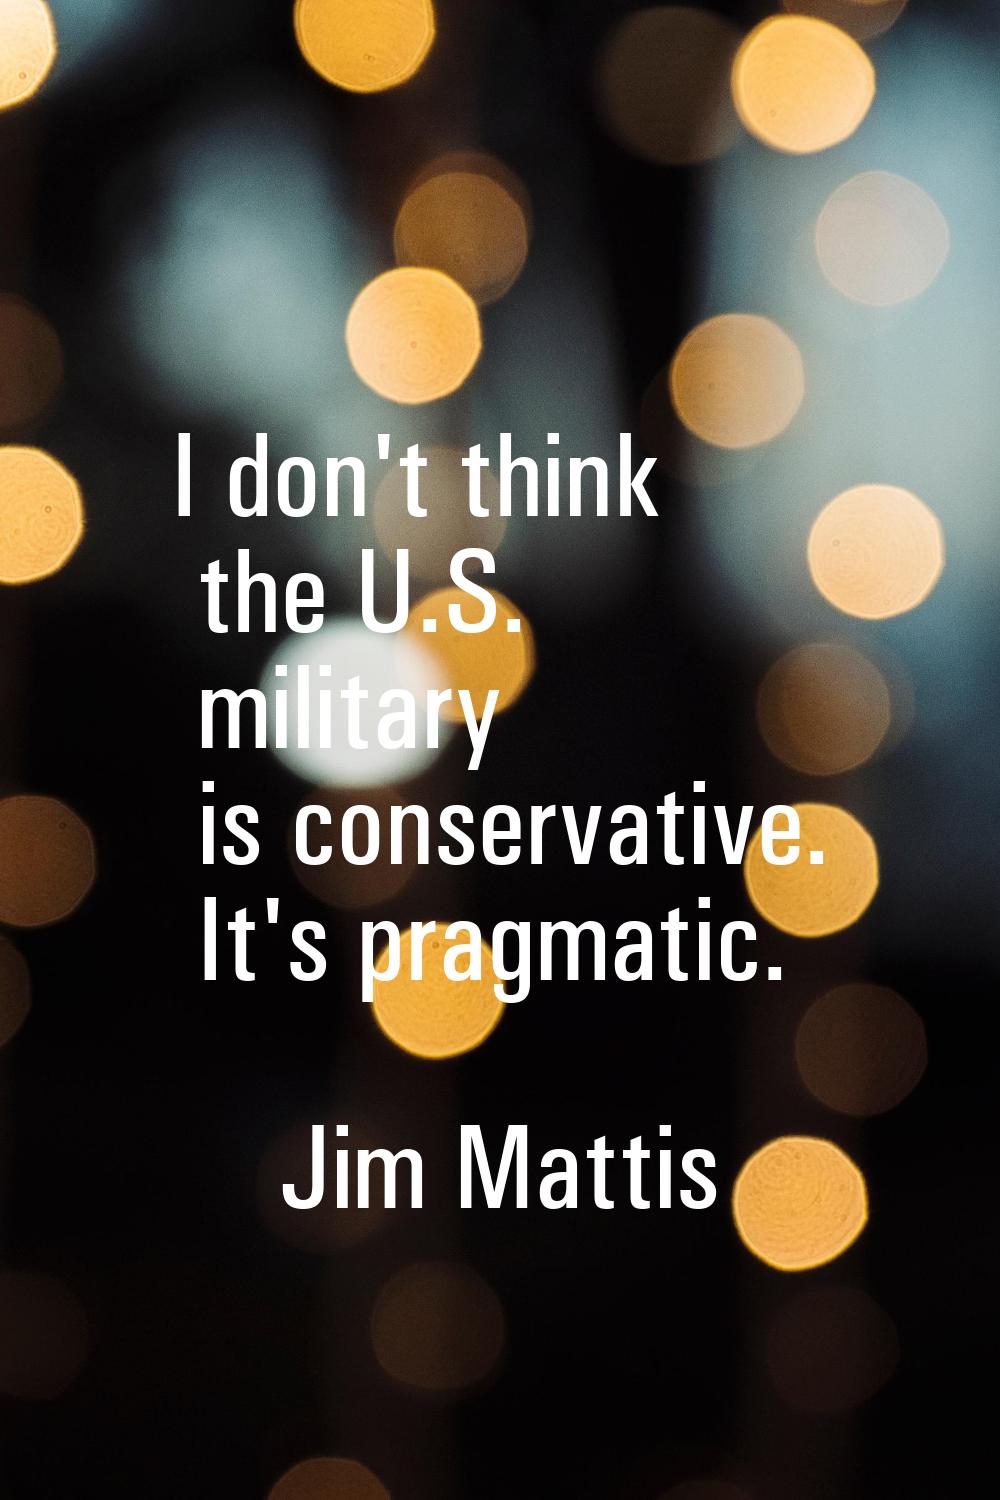 I don't think the U.S. military is conservative. It's pragmatic.